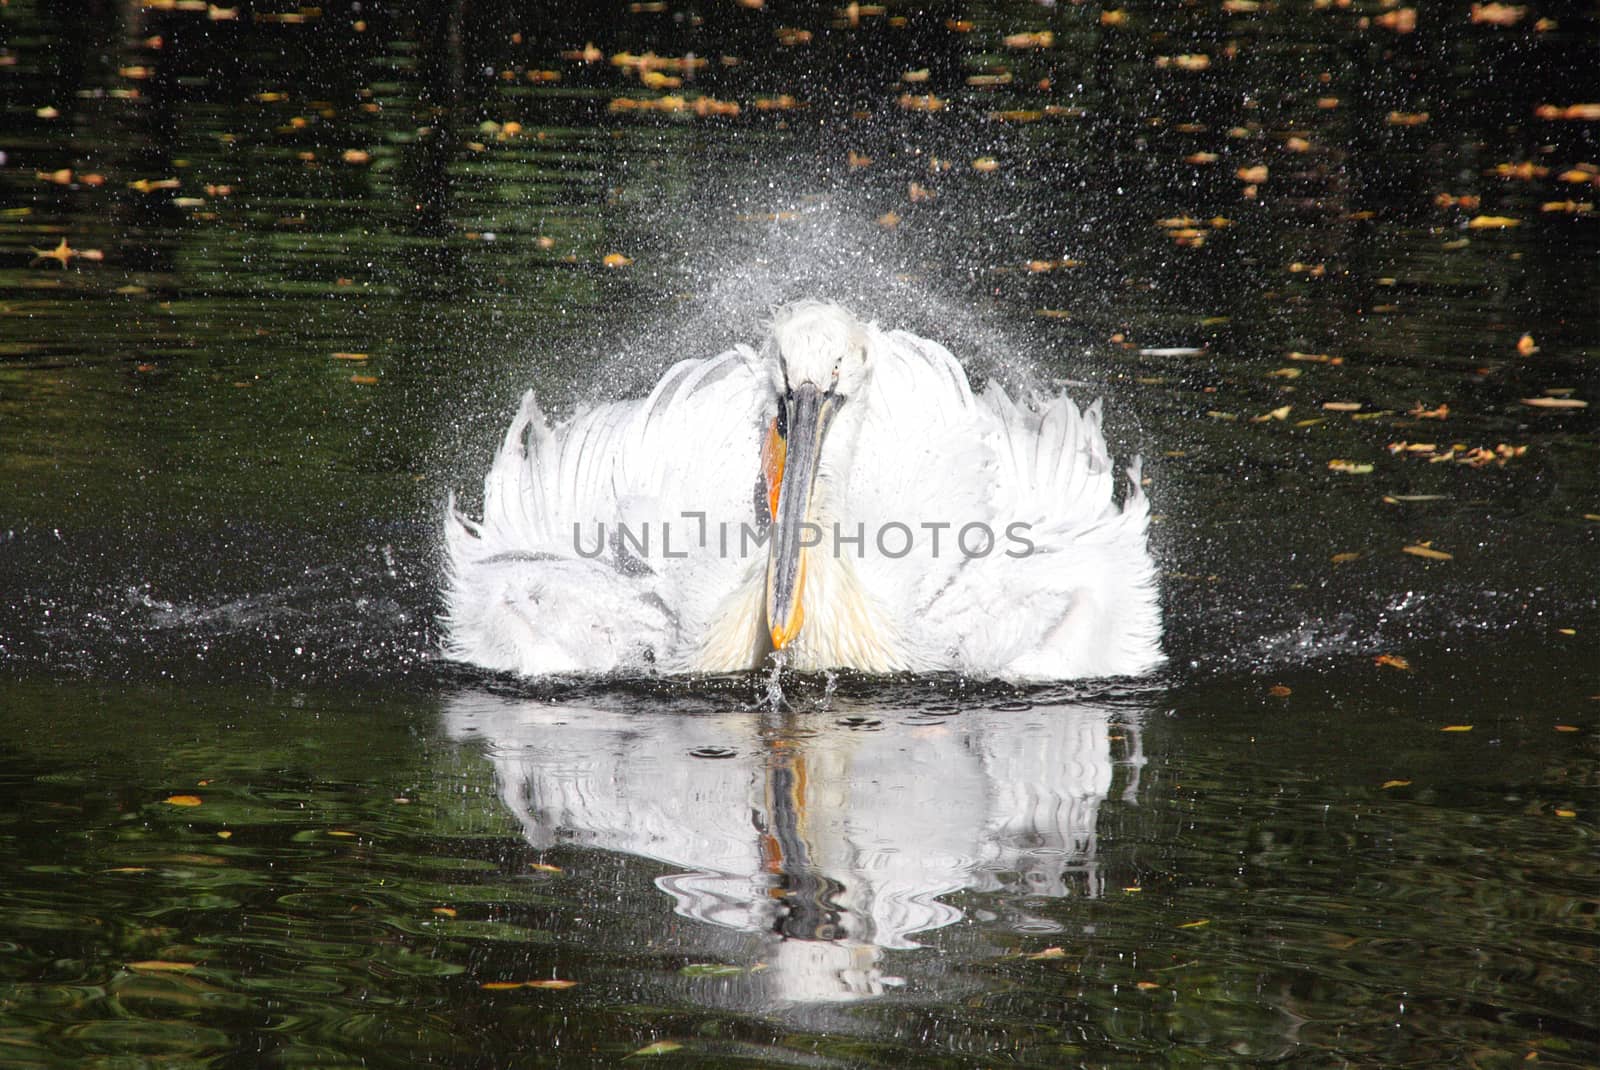 Shaking pelican sprays water droplets in the lake